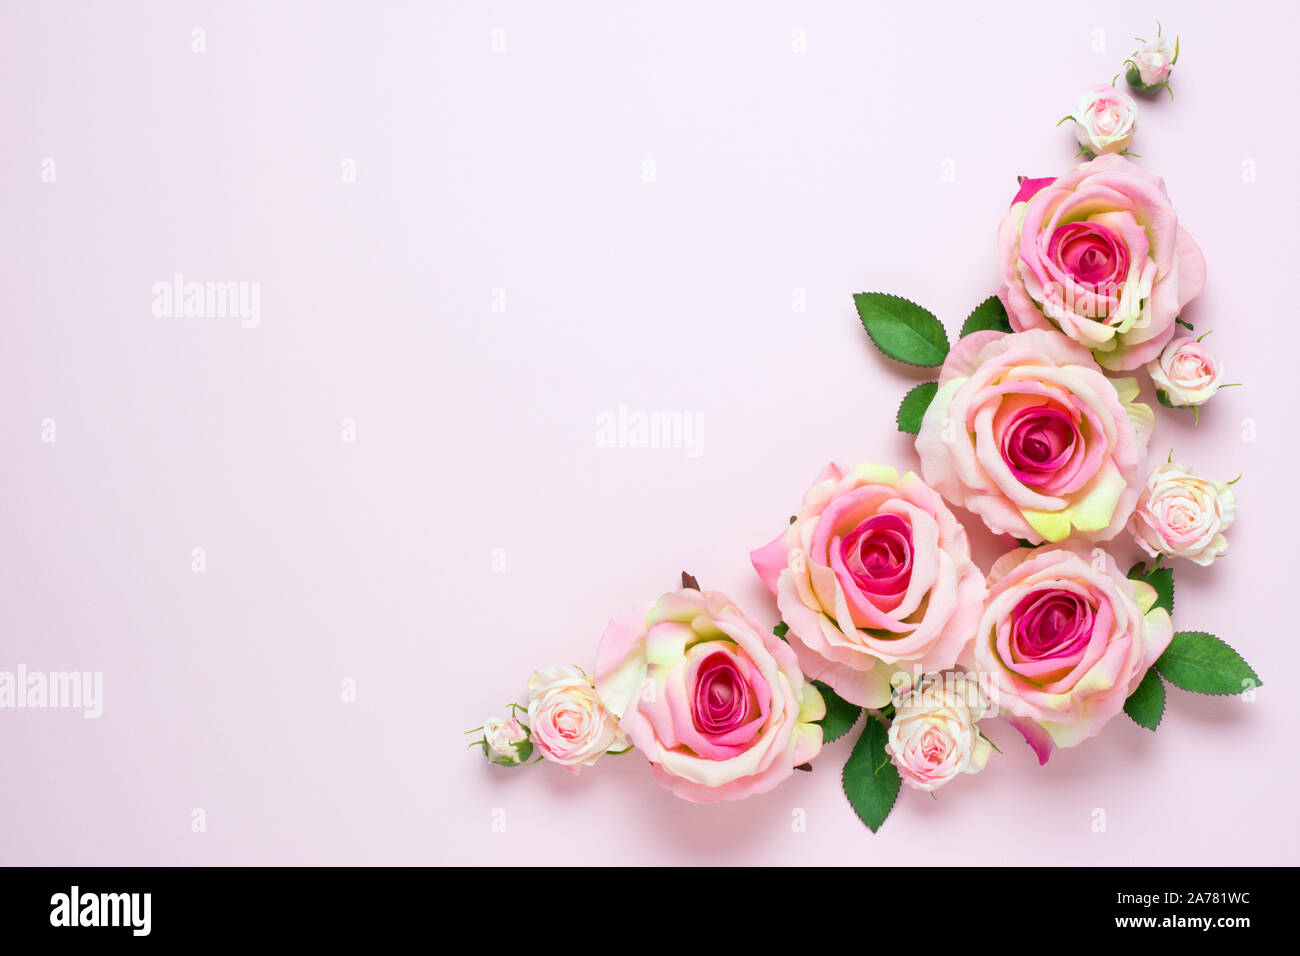 Beautiful wedding background with pink rose flowers on light pink background  Stock Photo - Alamy